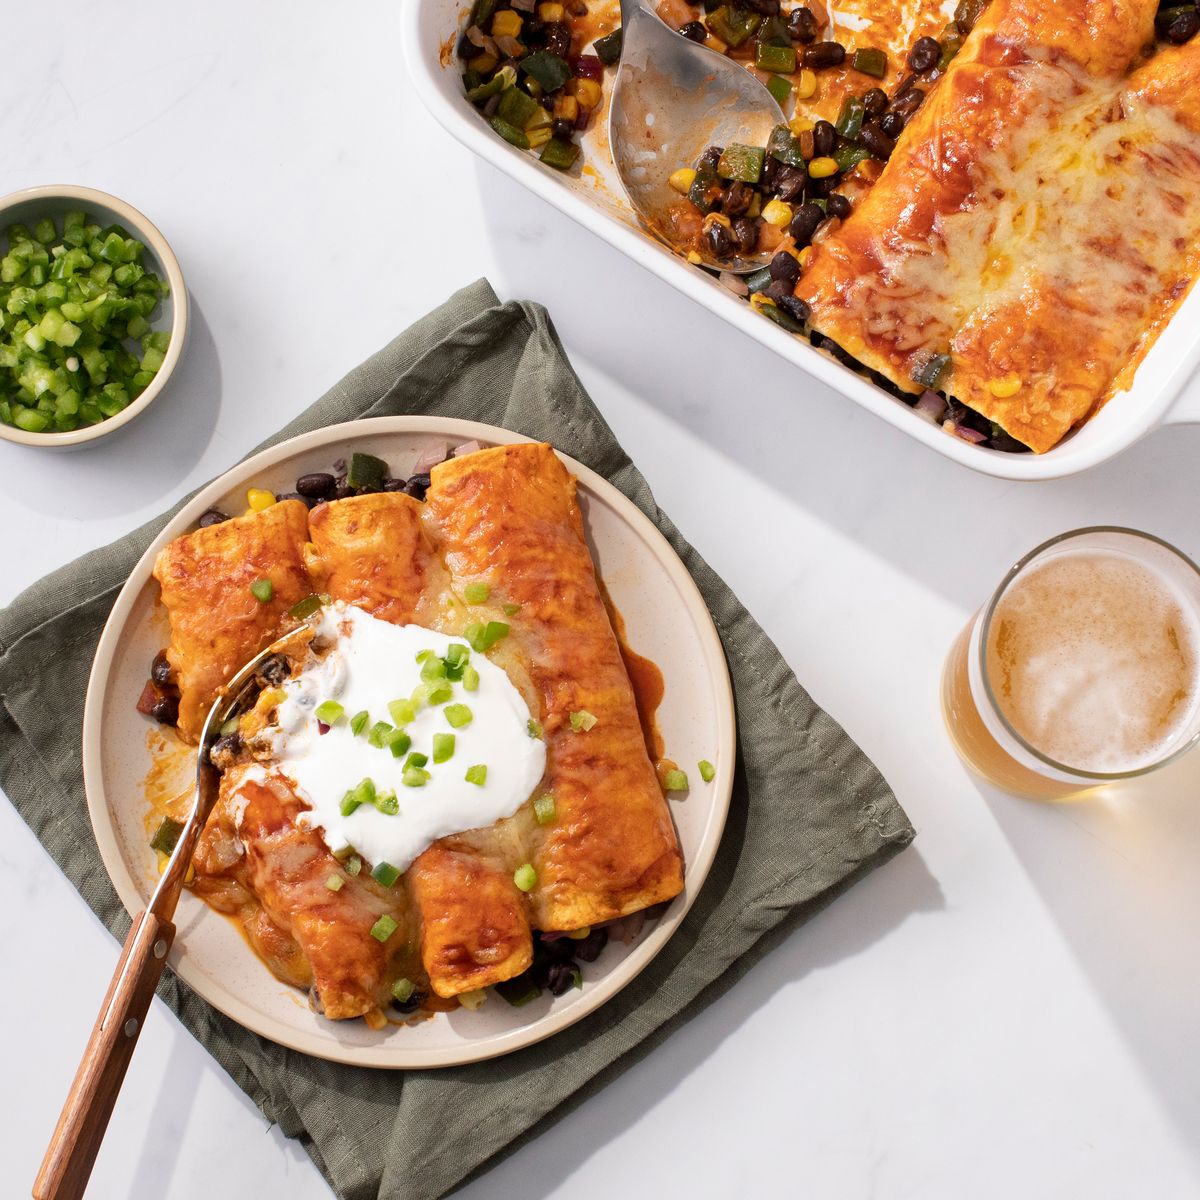 https://hips.hearstapps.com/hmg-prod/images/black-bean-enchiladas-with-poblano-peppers-1-ana-plefka-1-65580a53db293.jpg?crop=0.6666666666666666xw:1xh;center,top&resize=1200:*